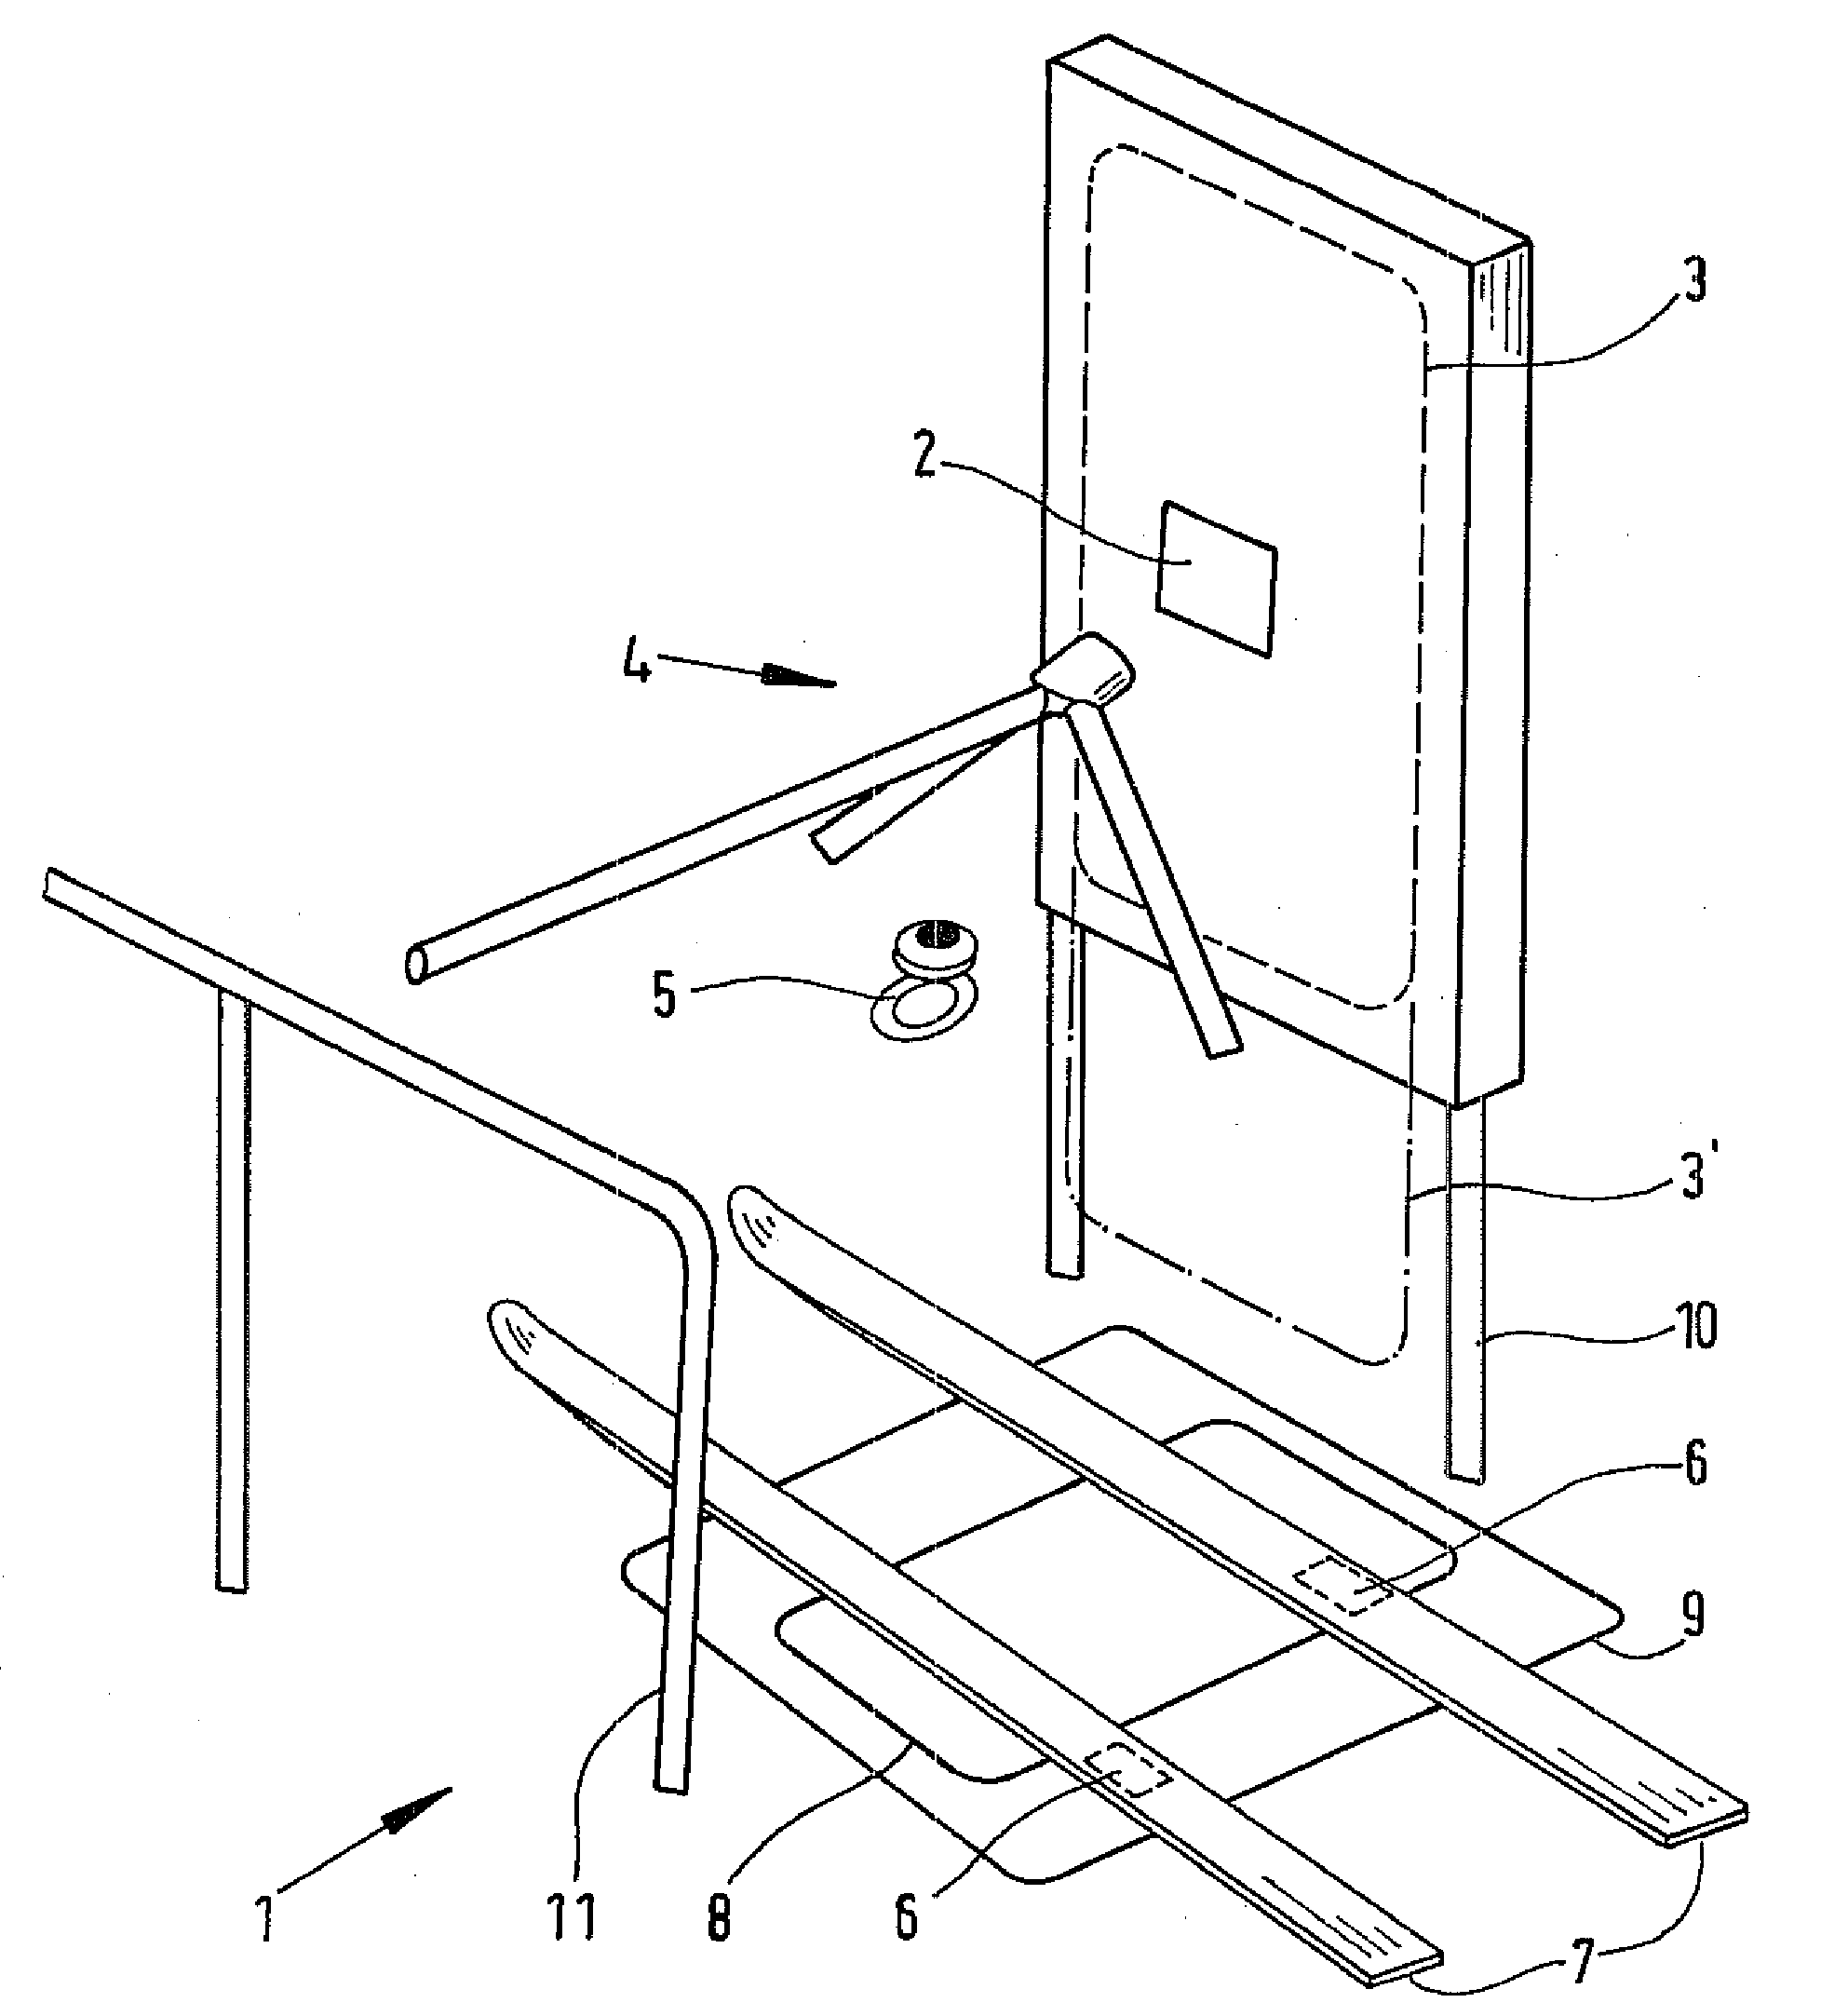 Method of controlling access to a sports facility